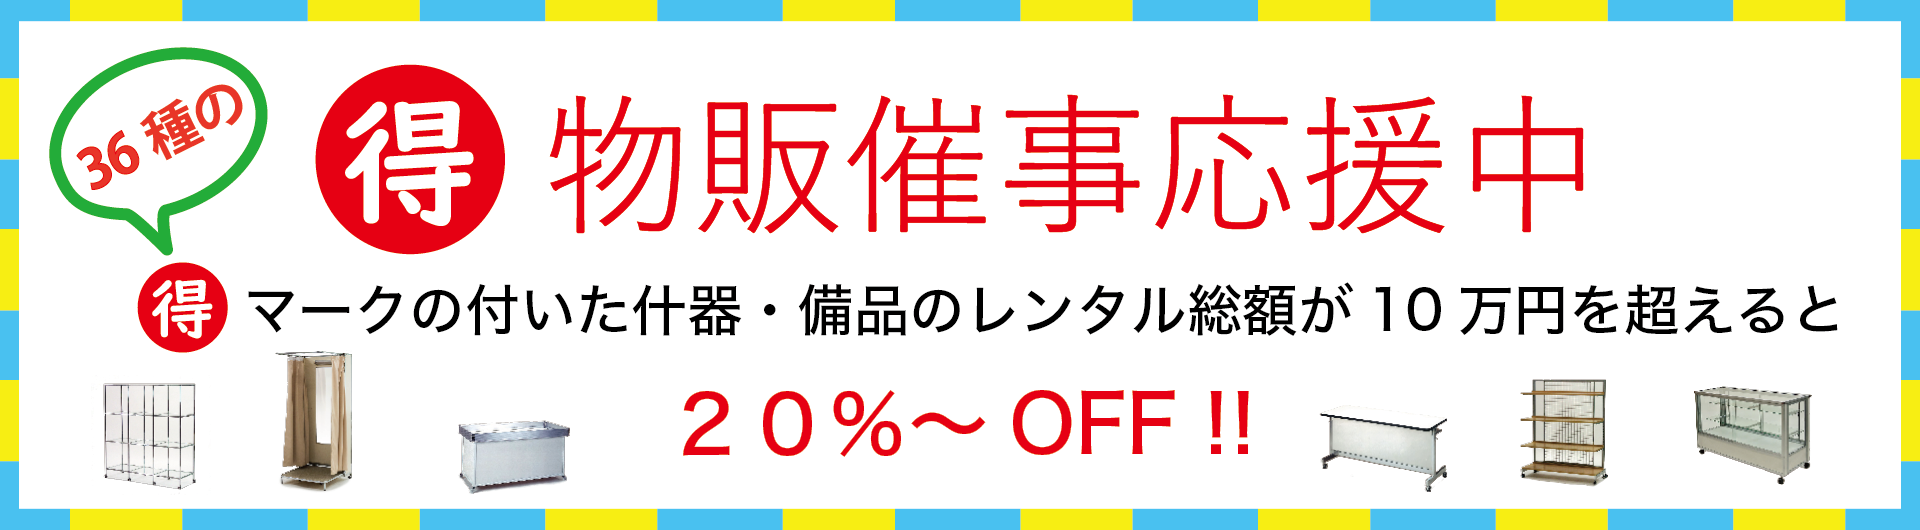 Martoku product sales event support campaign